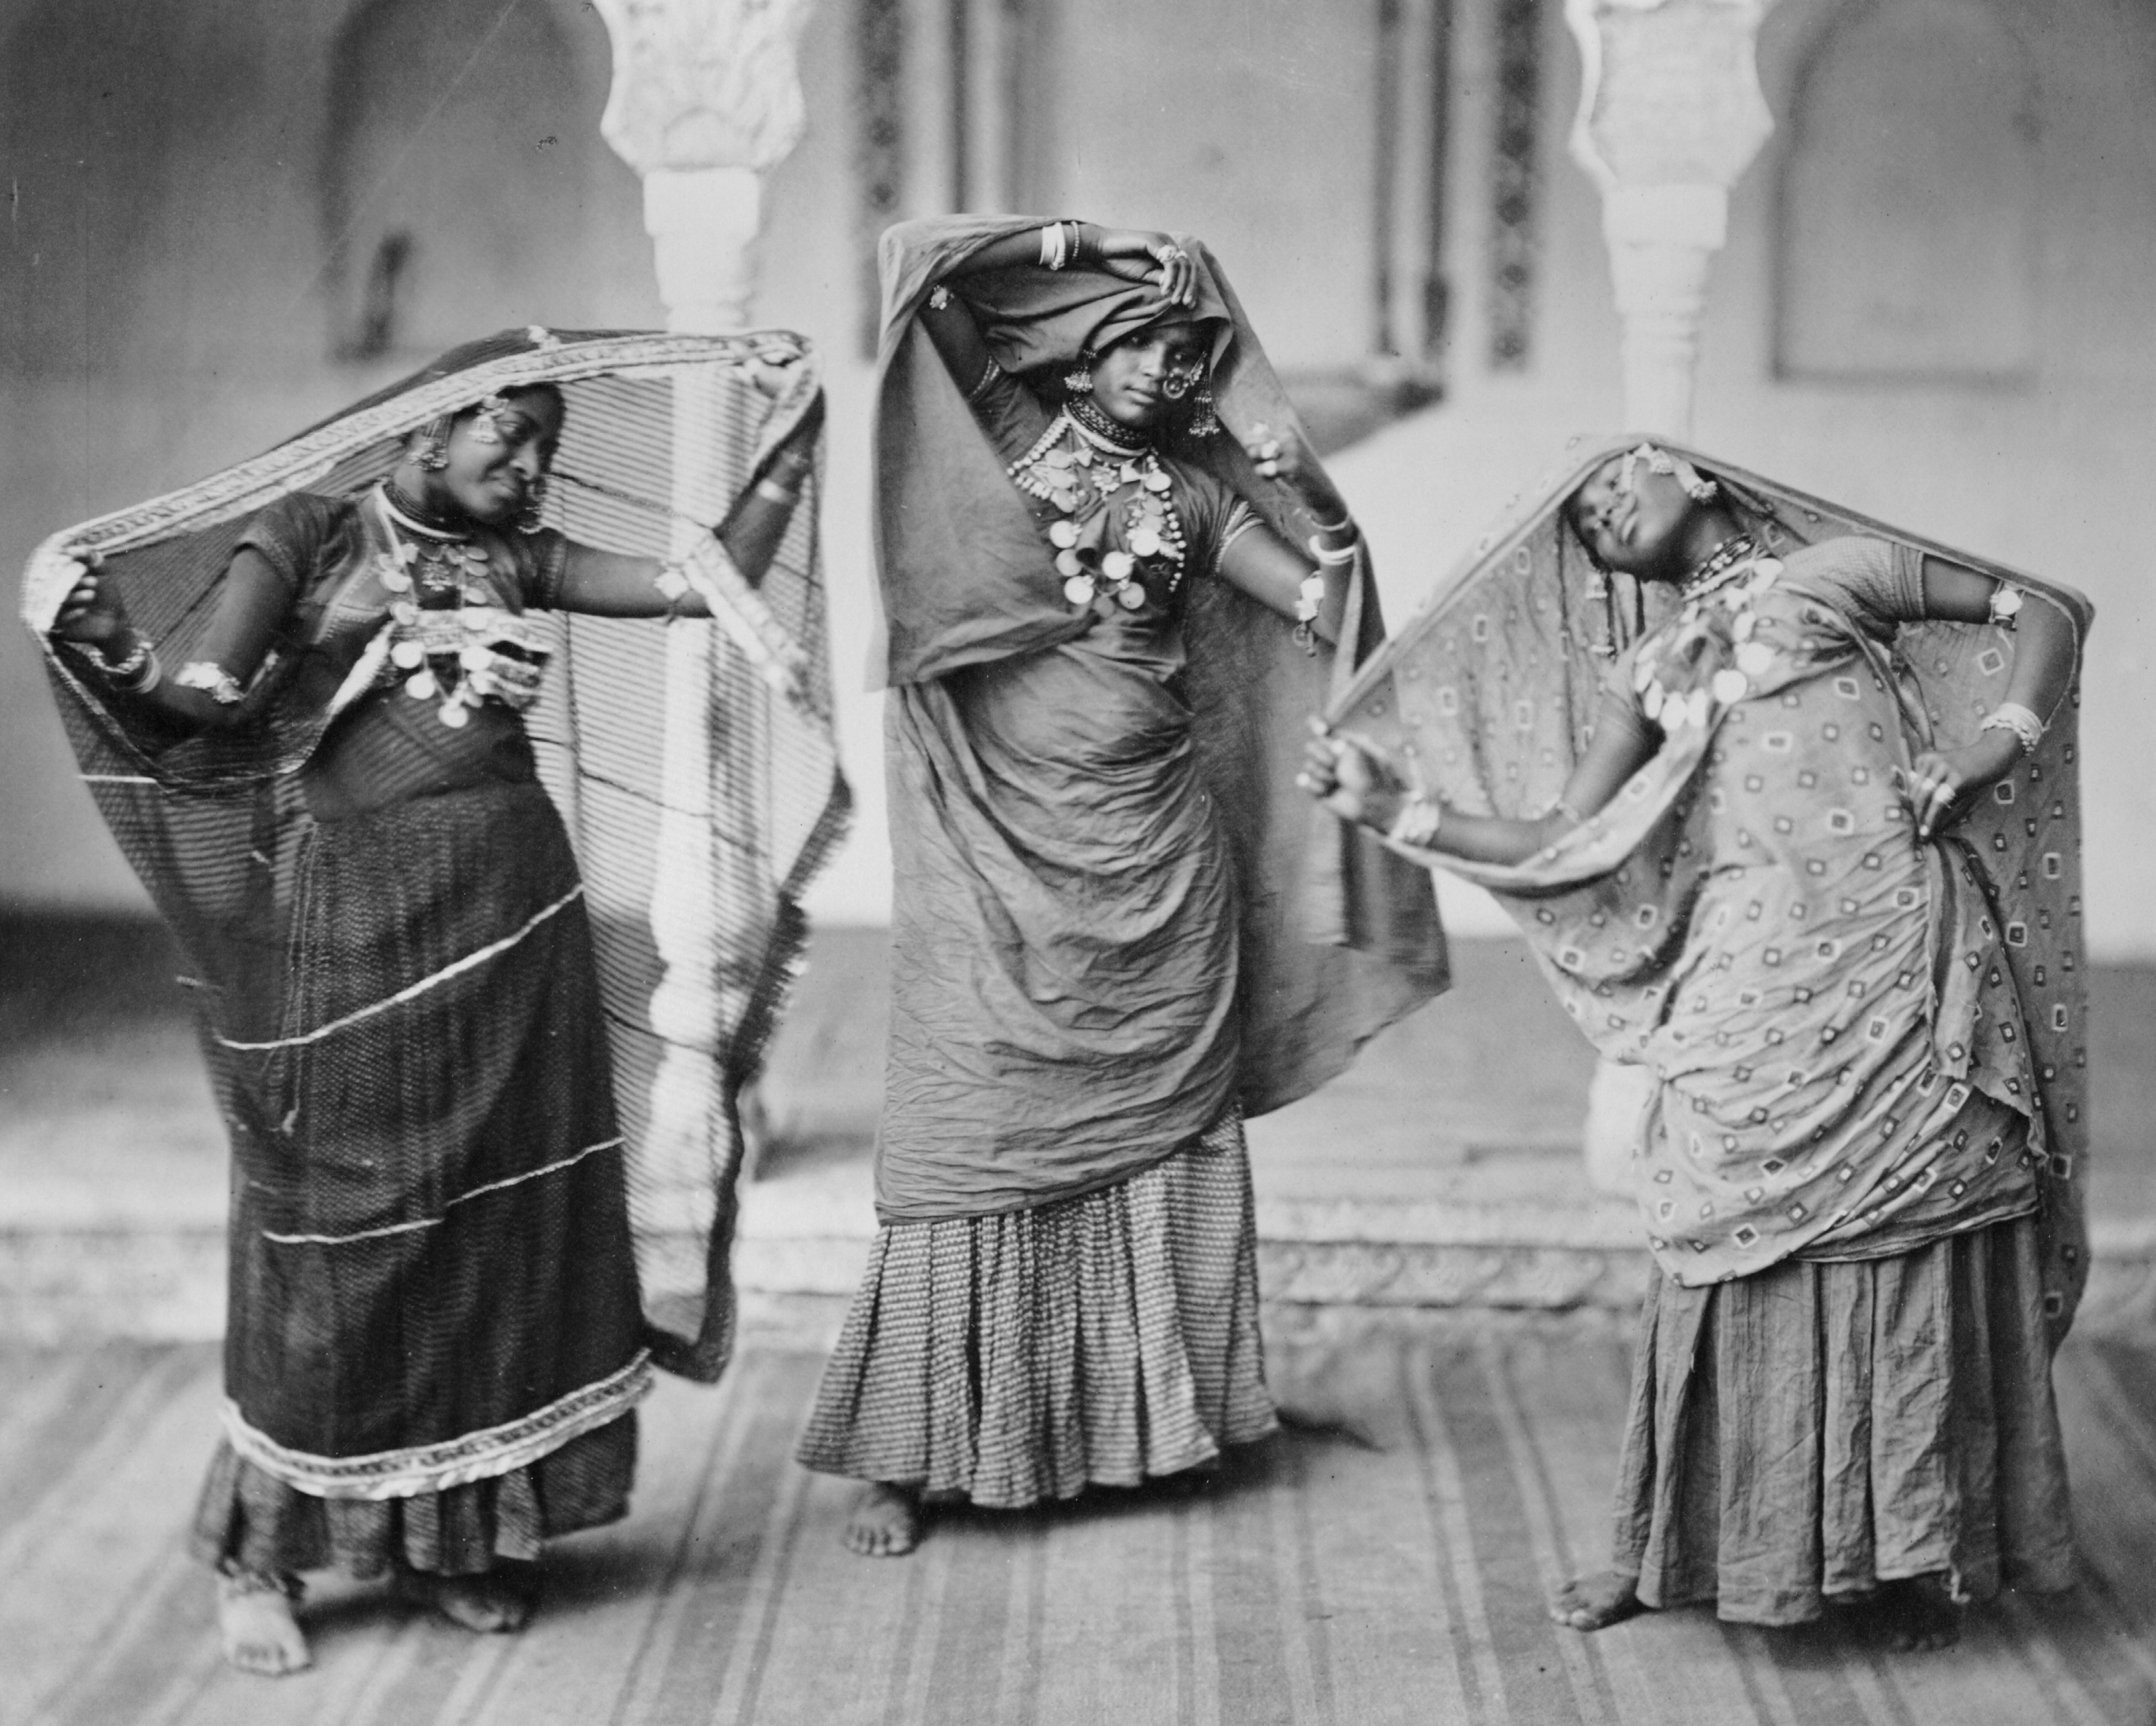 A photograph of three nautch dancers performing together